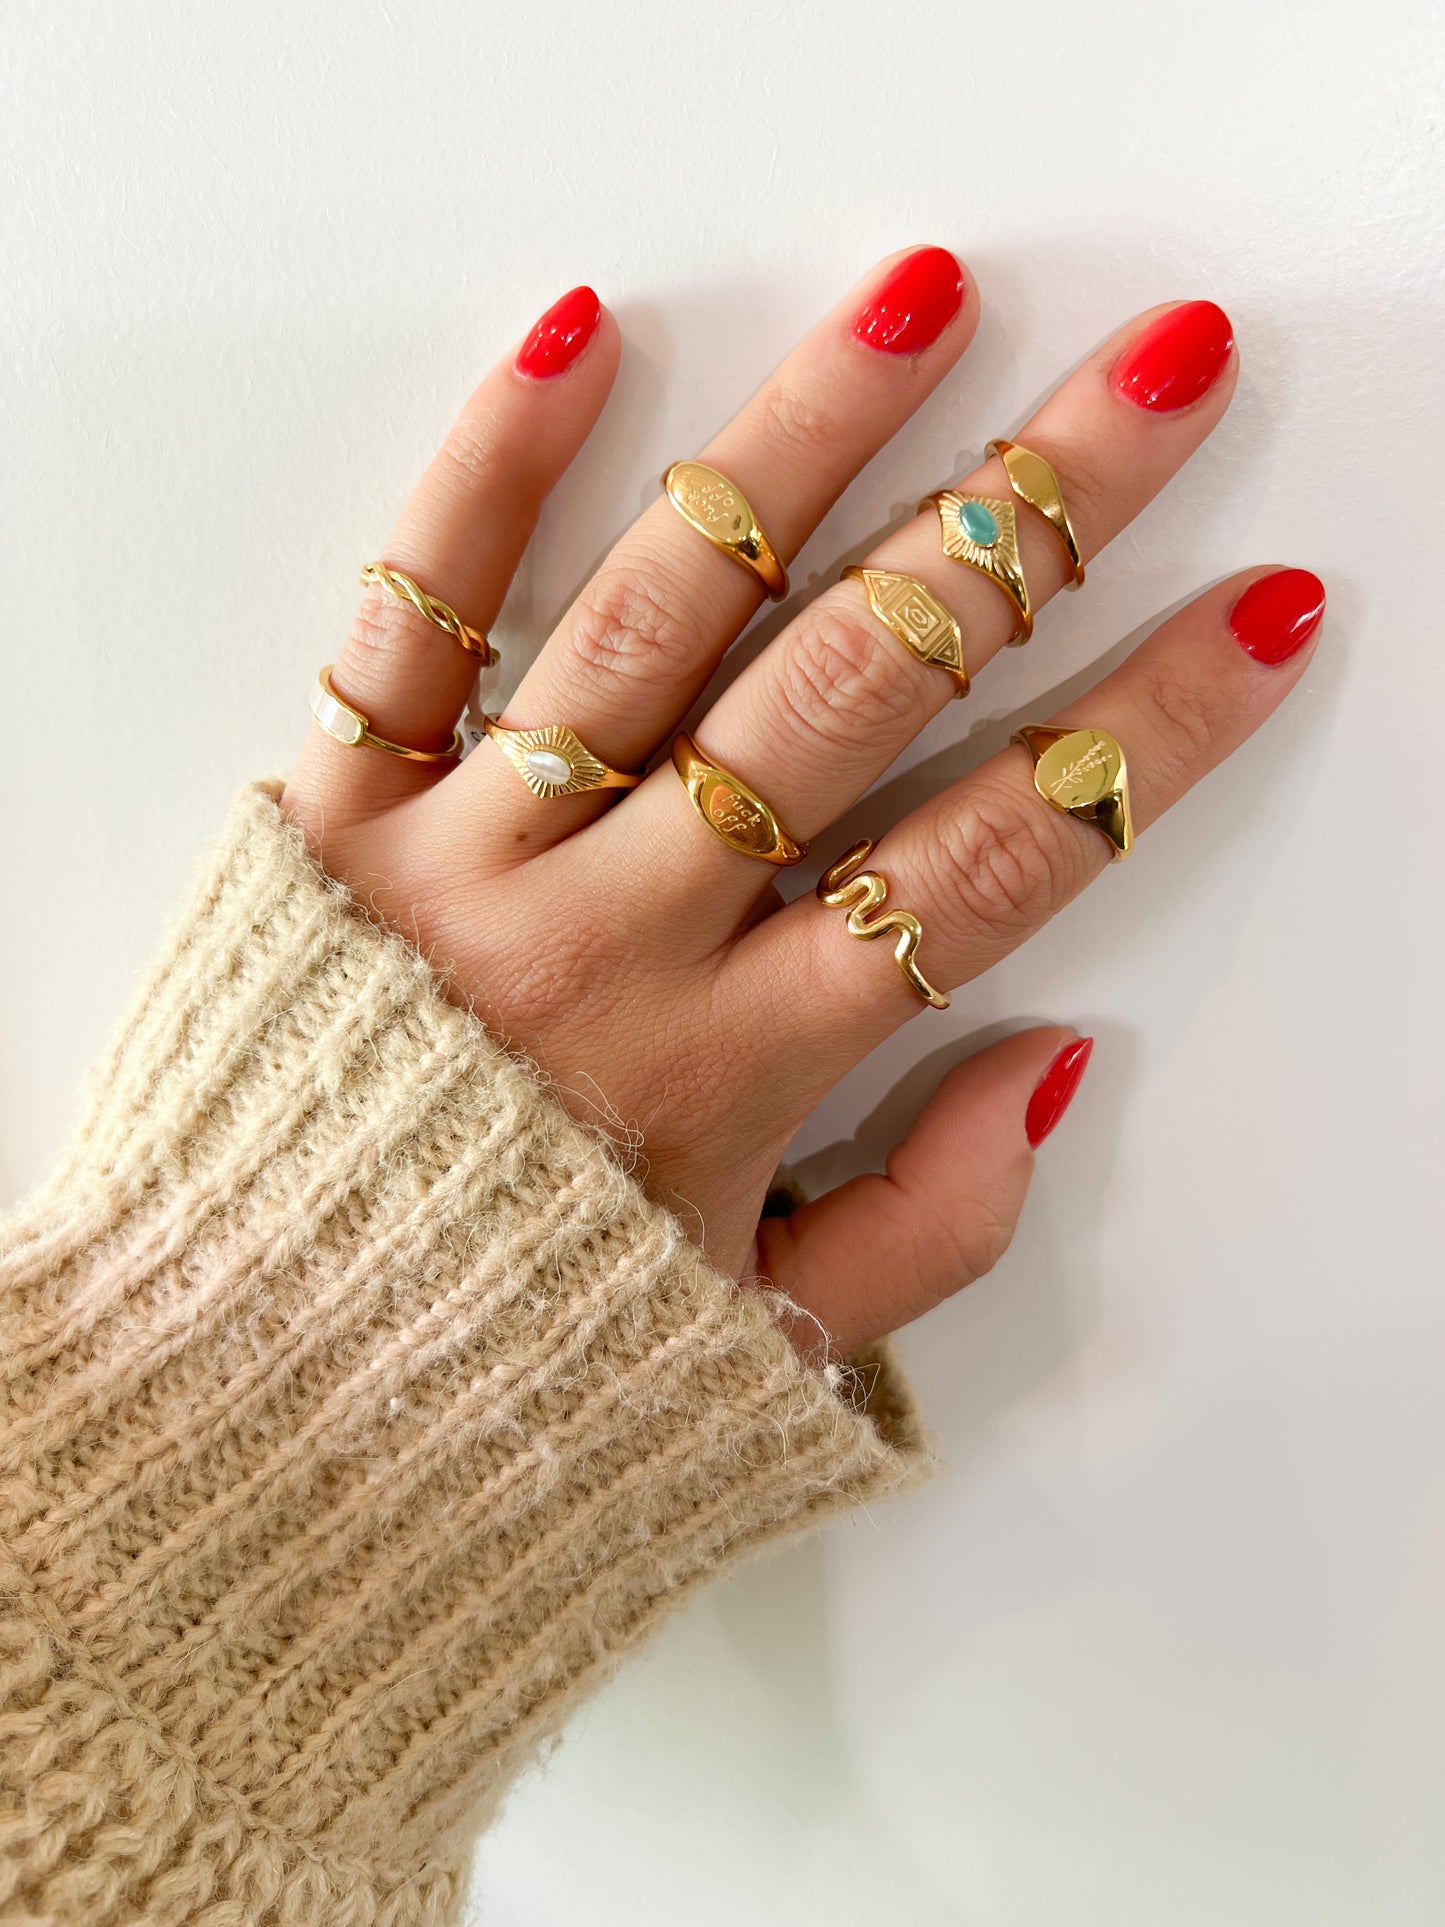 Aztec Styled Gold Ring